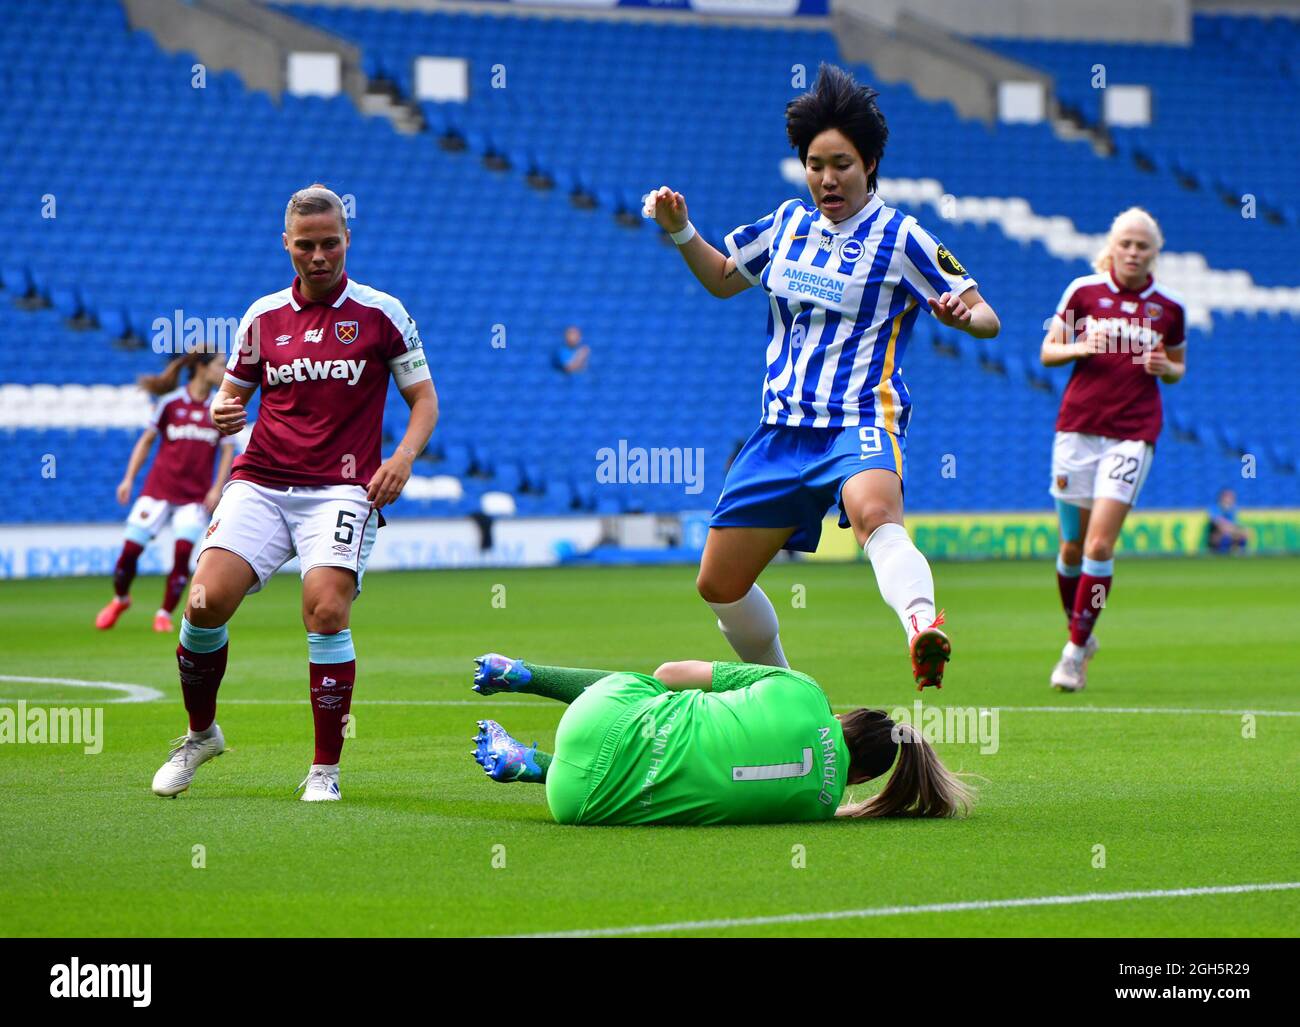 Brighton, UK. 05th Sep, 2021. Lee Geum-Min of Brighton and Hove Albion jumps over Mackenzie Arnold Goalkeeper of West Ham United during the FA Women's Super League match between Brighton & Hove Albion Women and West Ham United Ladies at The Amex Stadium on September 5th 2021 in Brighton, United Kingdom. (Photo by Jeff Mood/phcimages.com) Credit: PHC Images/Alamy Live News Stock Photo